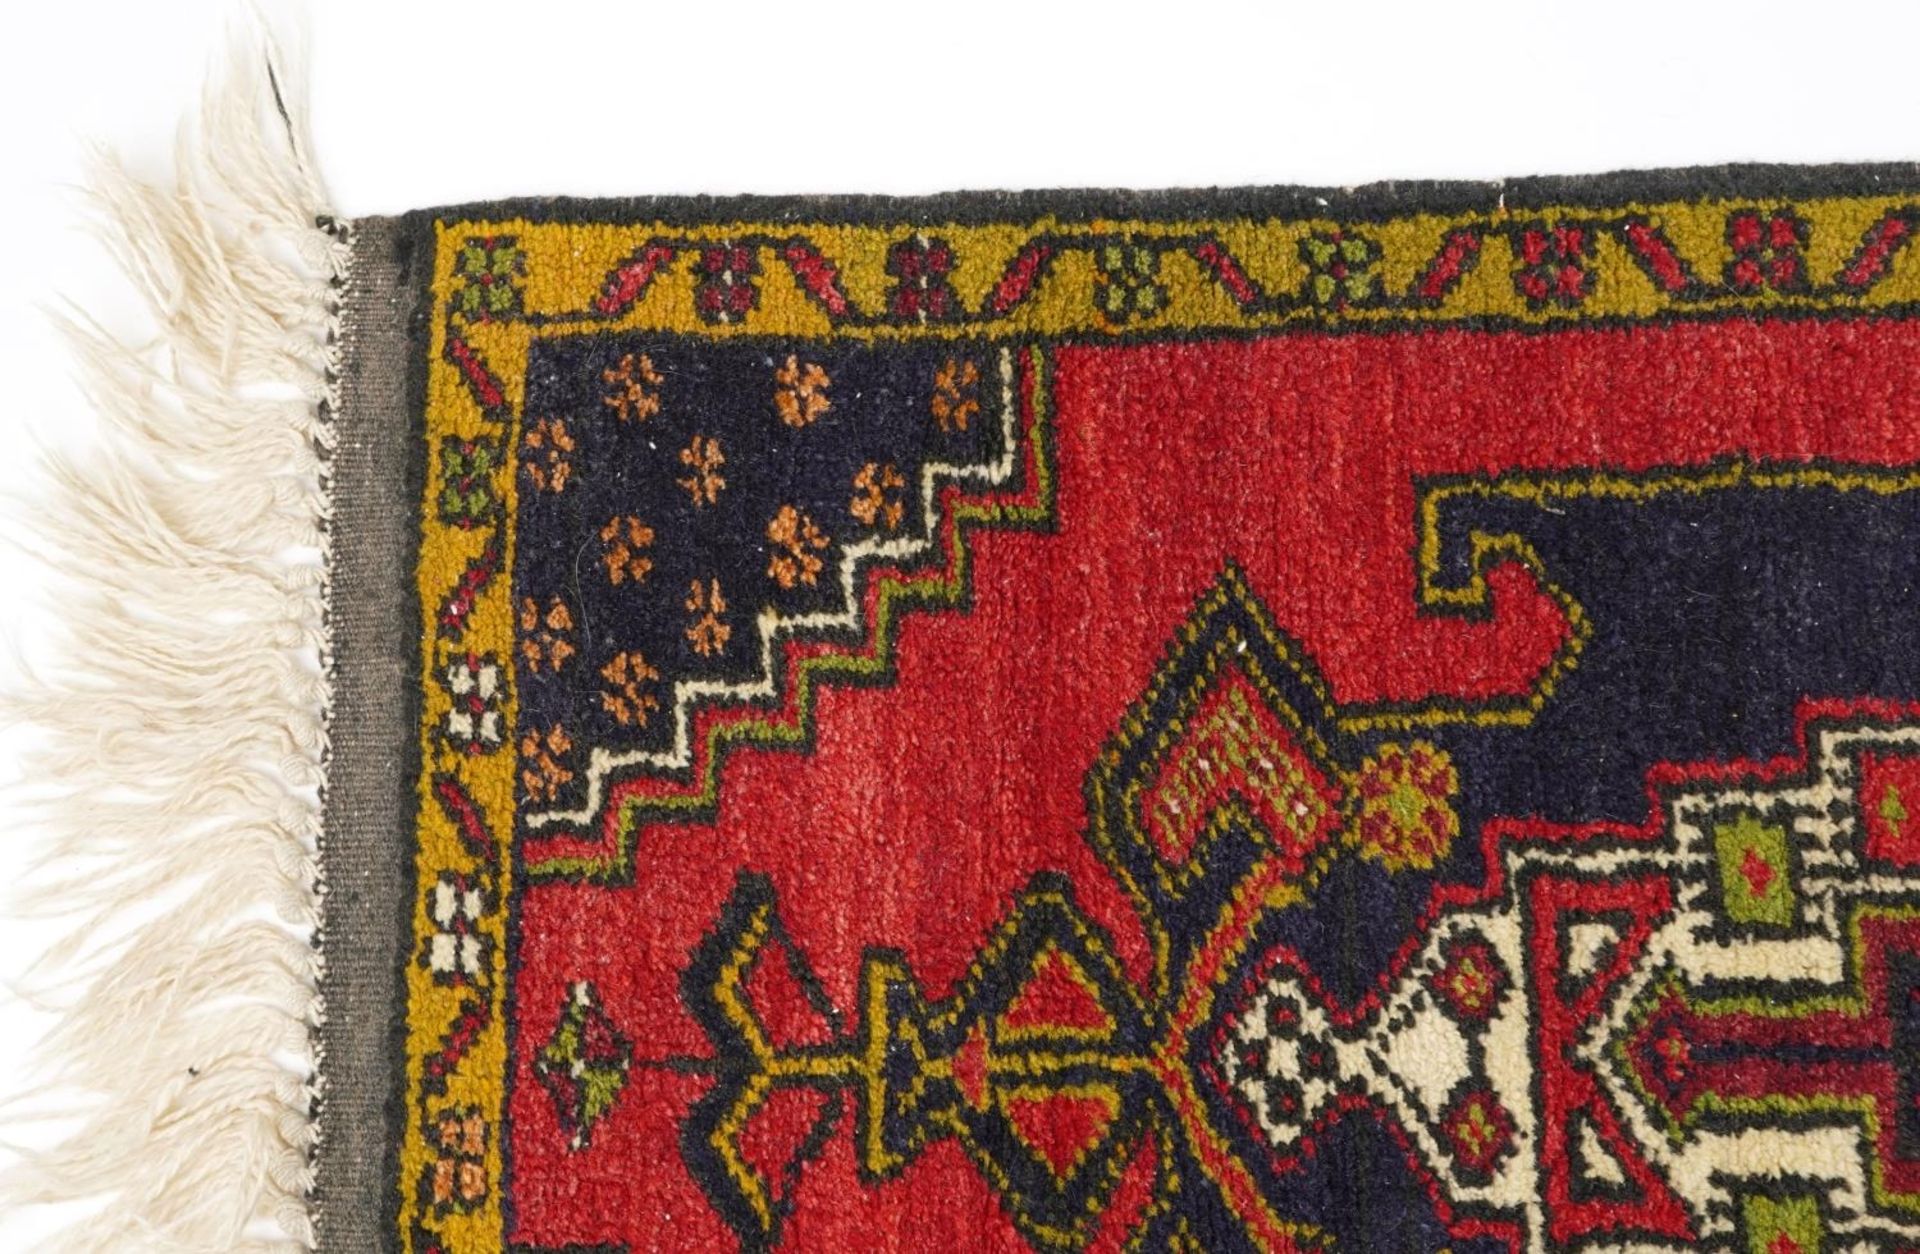 Rectangular Persian red and blue ground rug having an allover repeat floral design, 120cm x 53.5cm - Image 2 of 3